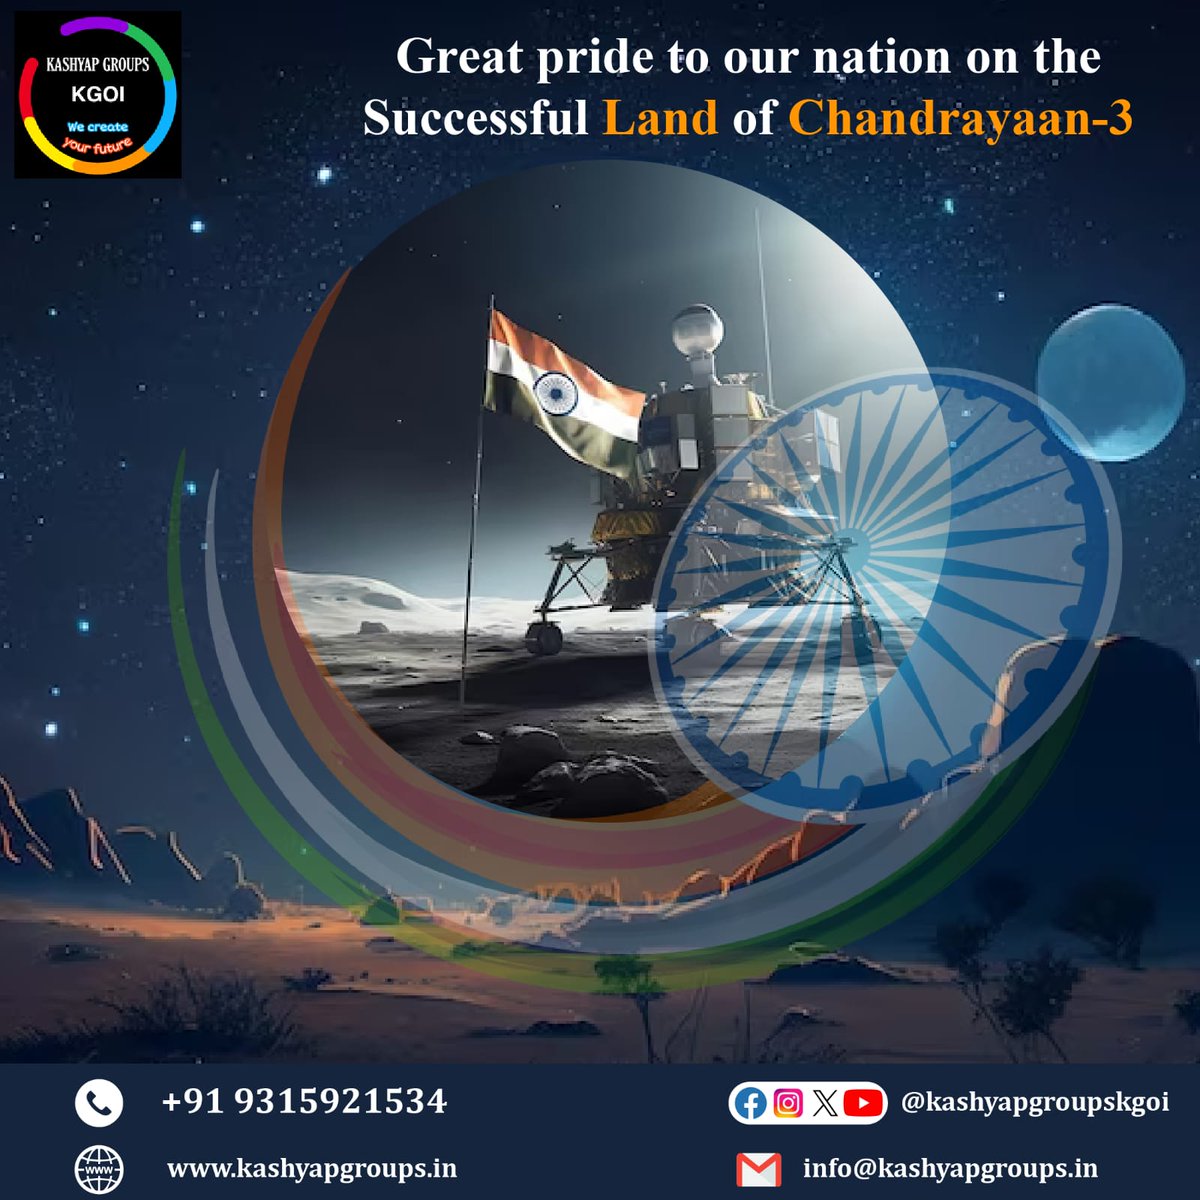 Wednesday Is A Big Day For India. Chandrayaan 3 Set To Land On The Moon's Surface At The Around 6.04Pm On The 23rd August! 👇Connect with us now for more details 👉 surl.li/kjglb 📧 info@kashyapgroups.in ☎ +91- 9315921534 #chandrayaan3 #chandrayaan #isro #cosmicjourney